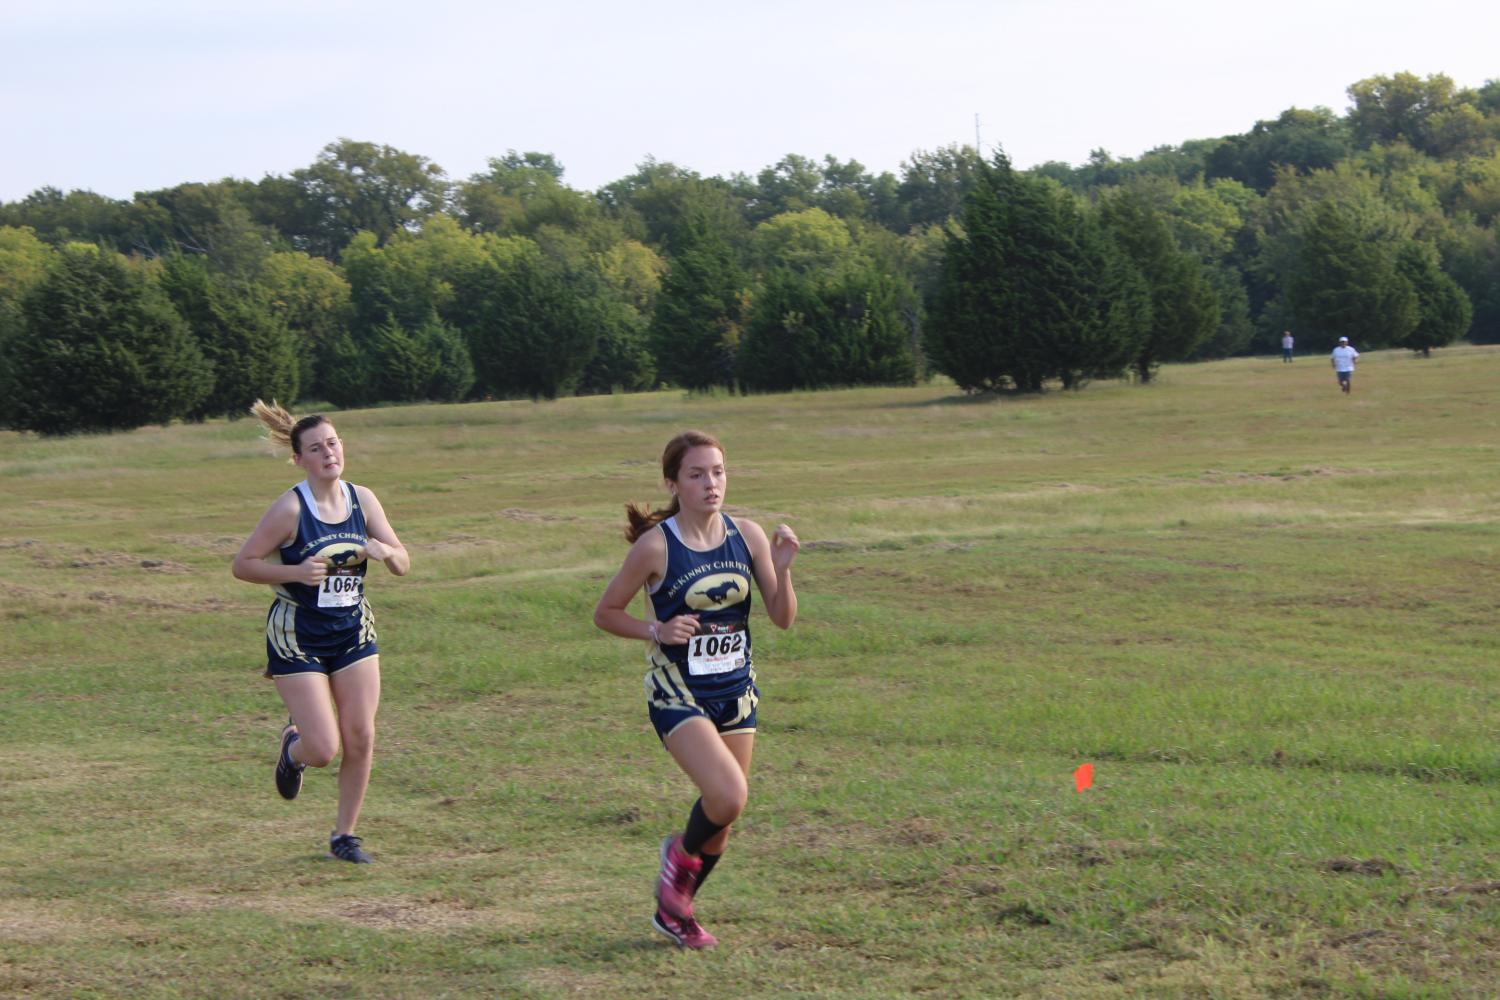 Junior Kara Vita and Sophomore Brooke Fillebrown keep a steady pace during the race to keep their place.